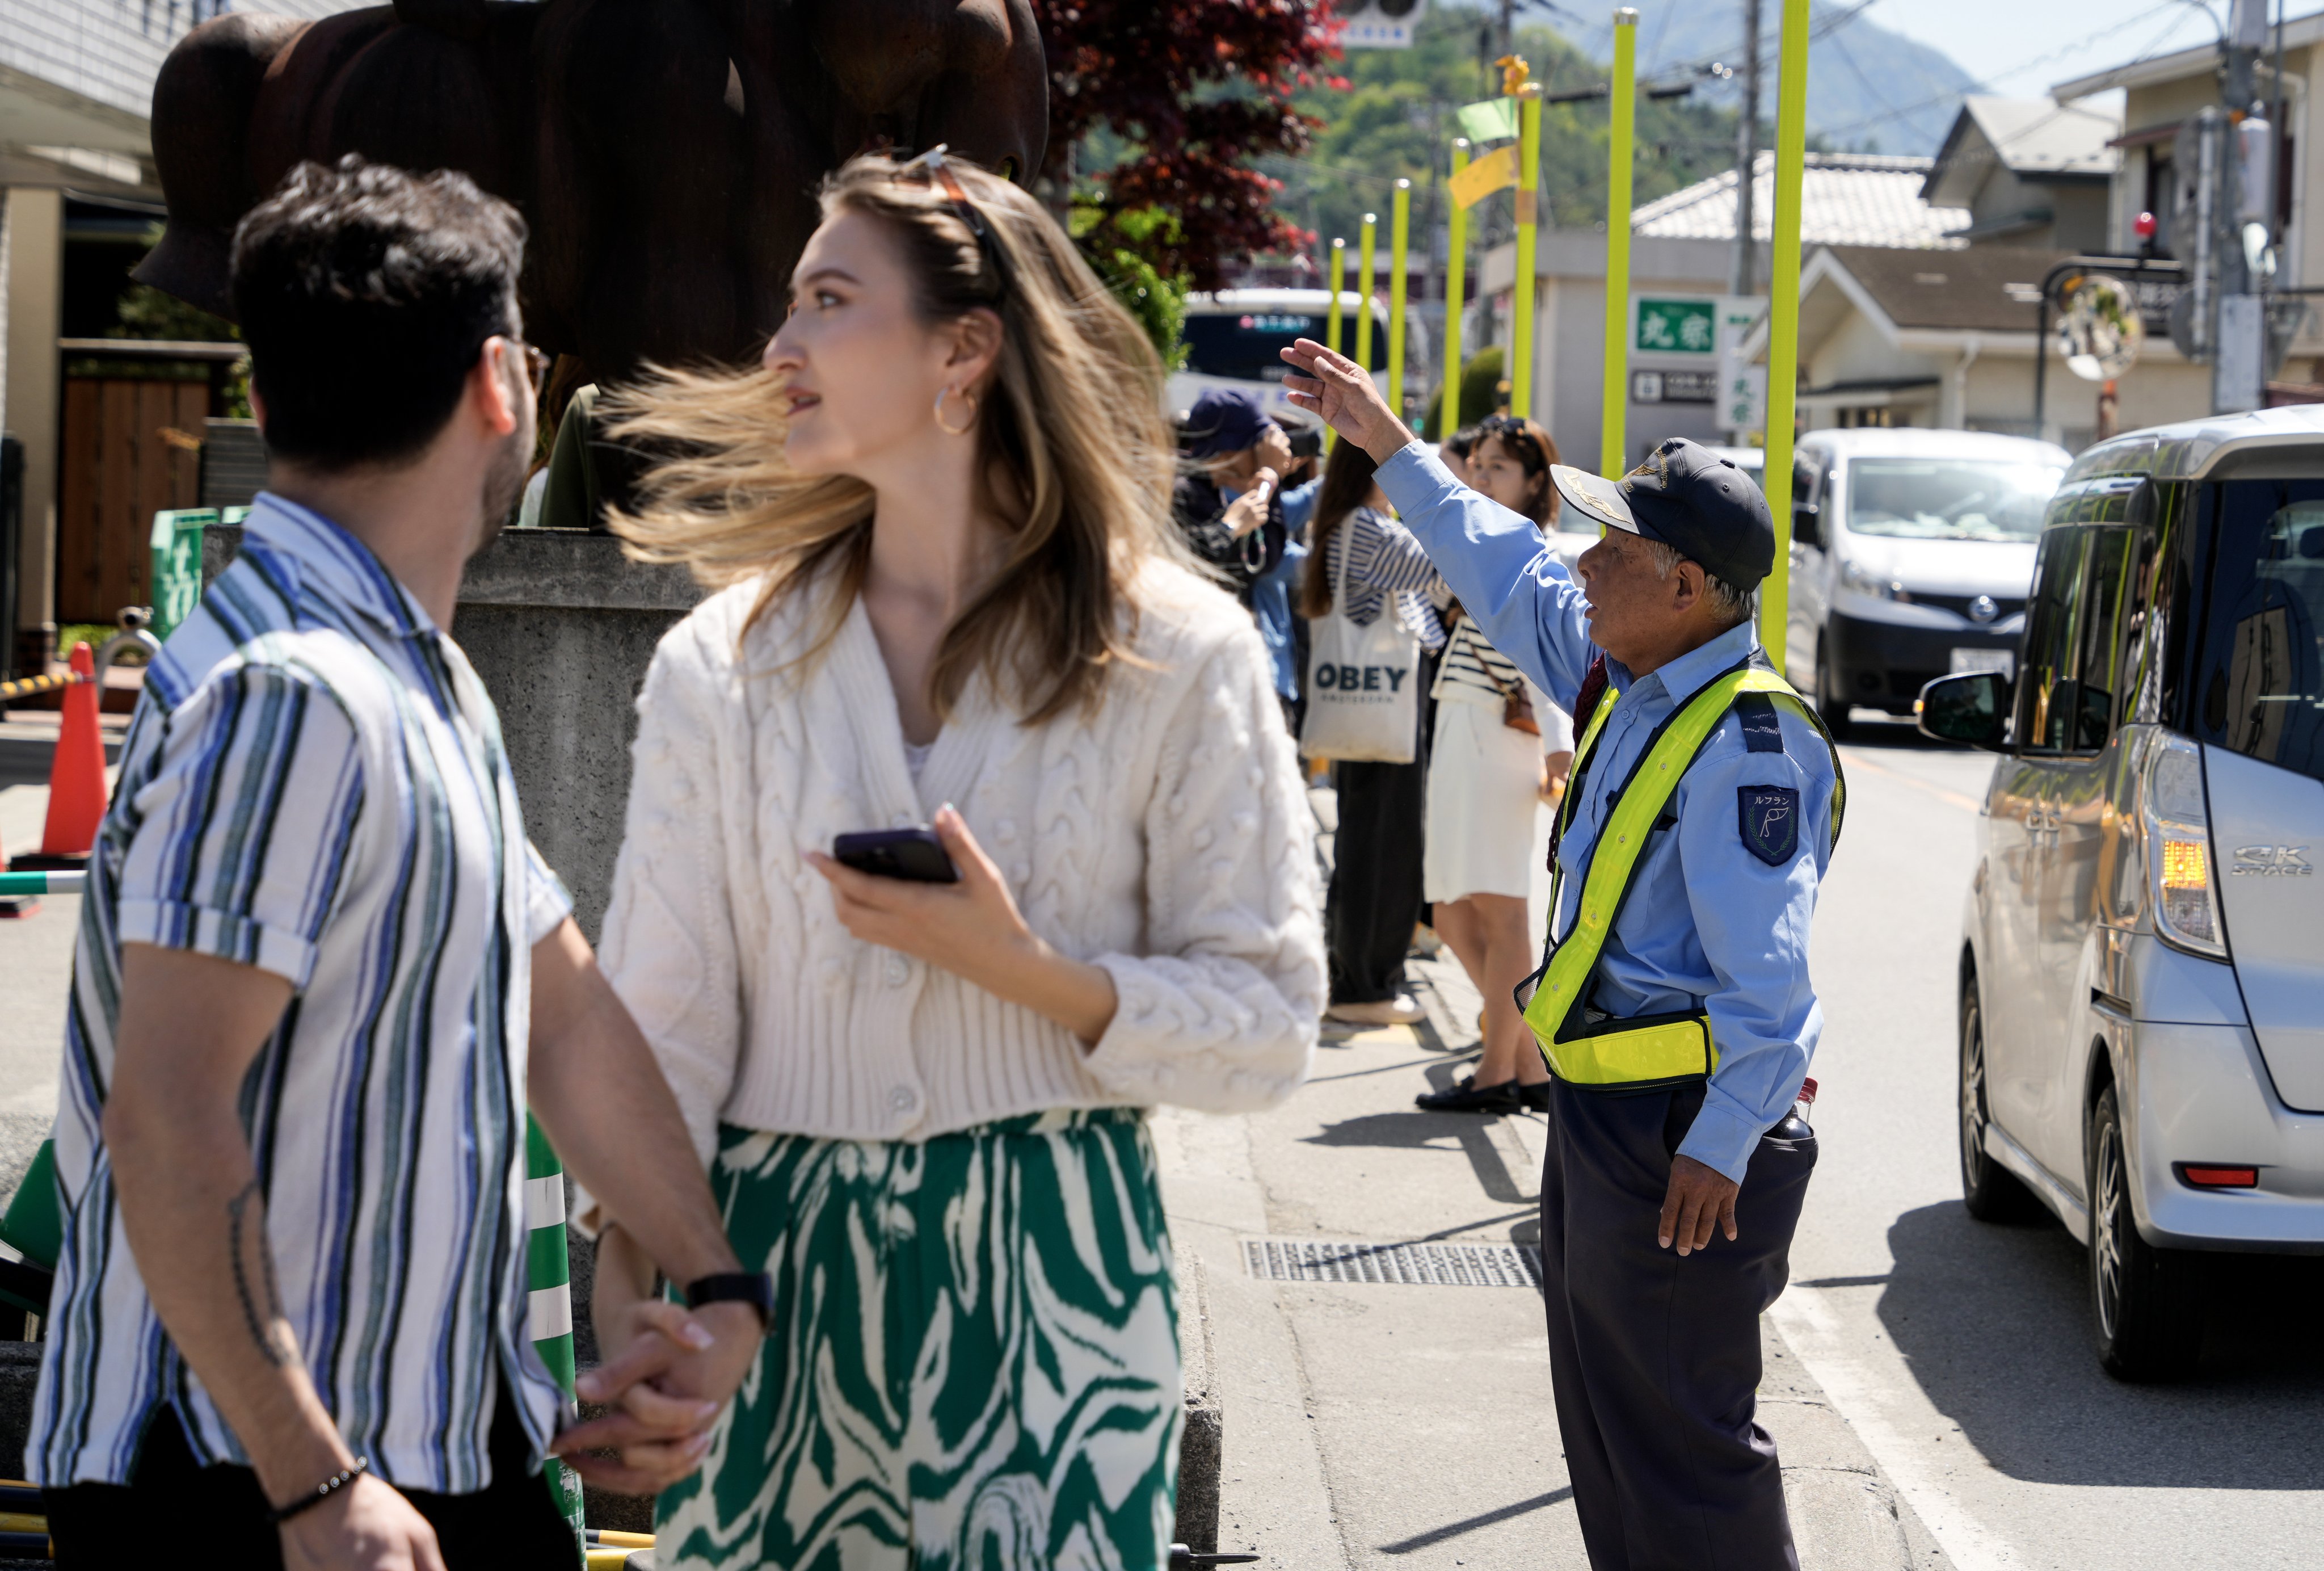 A security guard gestures towards foreigners as they gather on in Fujikawaguchiko, north of Japan’s Mount Fuji. Japan has been encouraging immigration to combat labour shortages. Photo: EPA-EFE